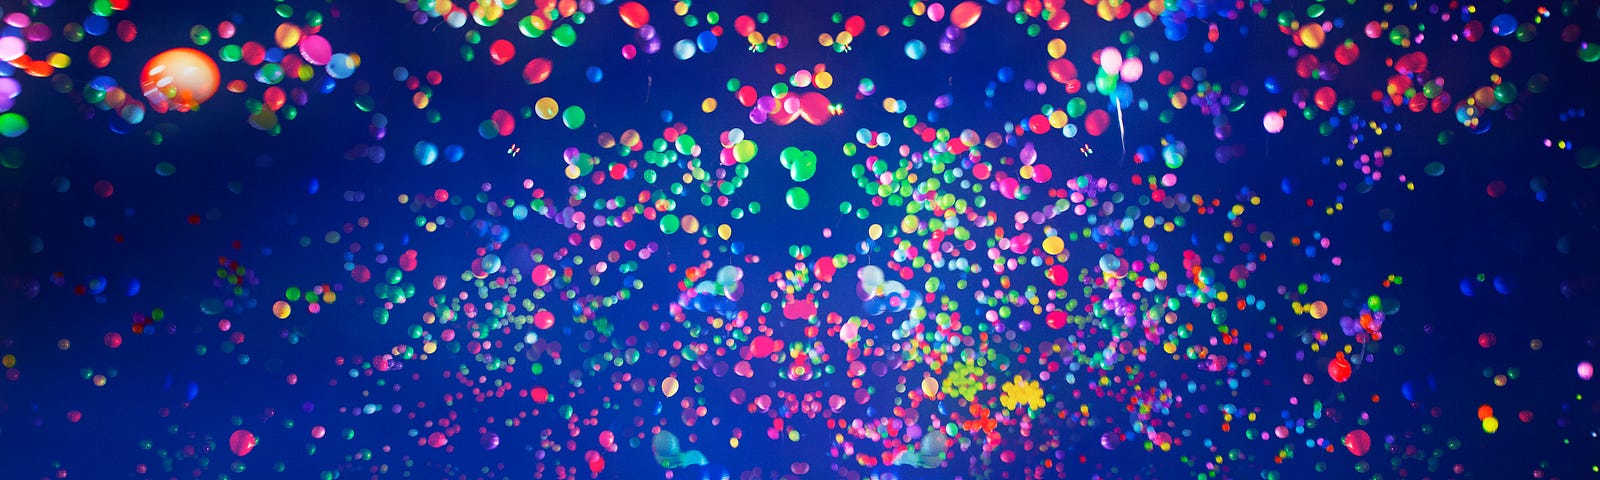 Many multi-colored balloons in the dark sky.